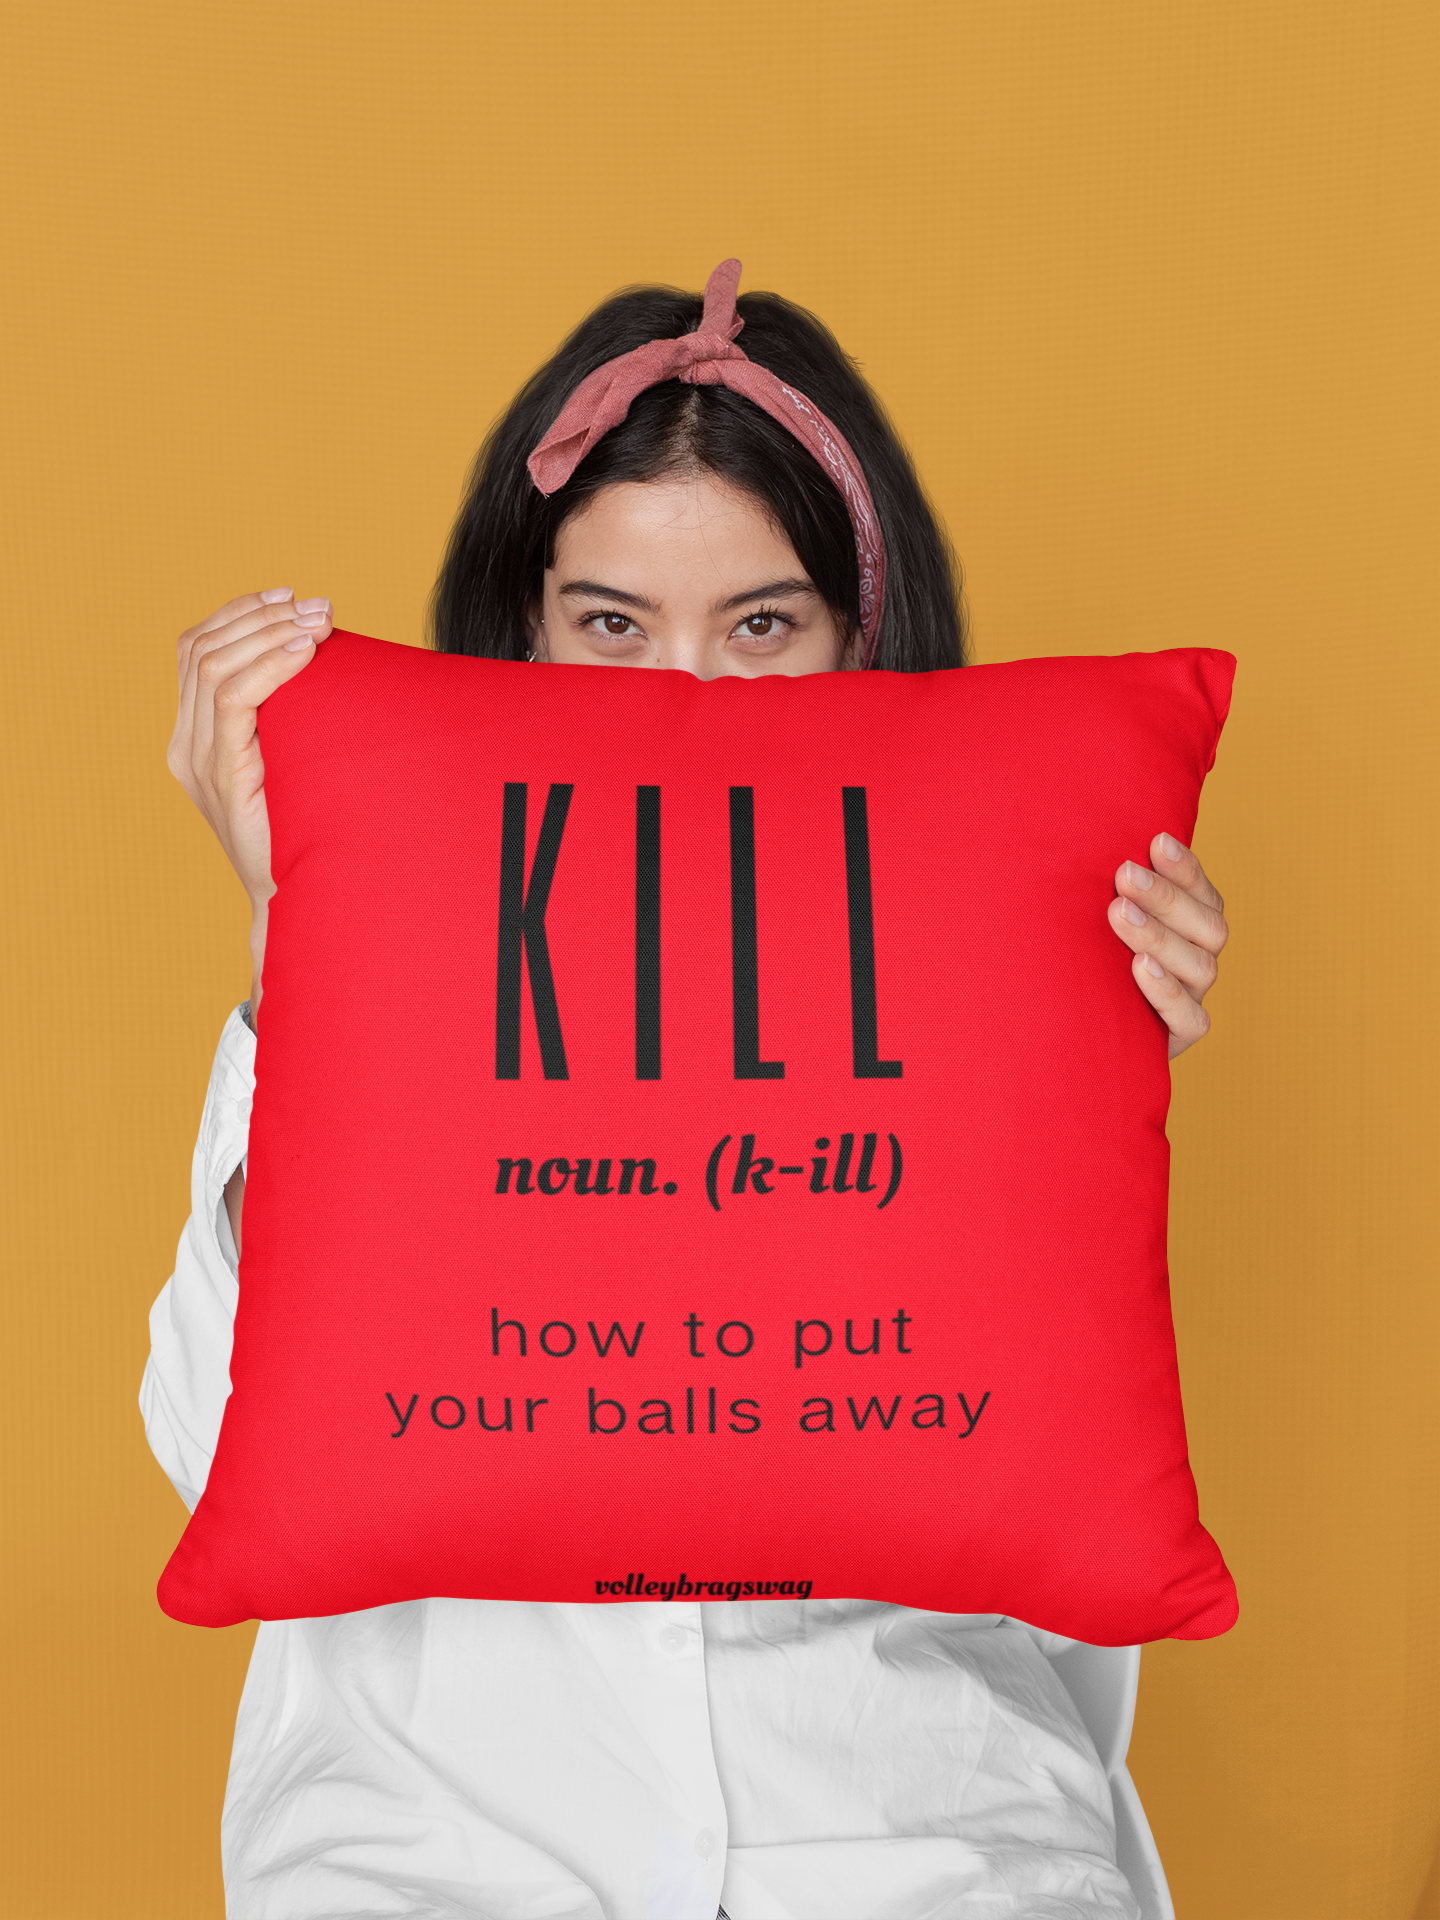 kill - how to put your balls away. April Chapple, Launches a Hilarious Volleyball  Pillow Line With Fun Tongue-in-Cheek Designs sure to make players and enthusiasts laugh available on Etsy and Amazon in time for Cyber Monday and Christmas.